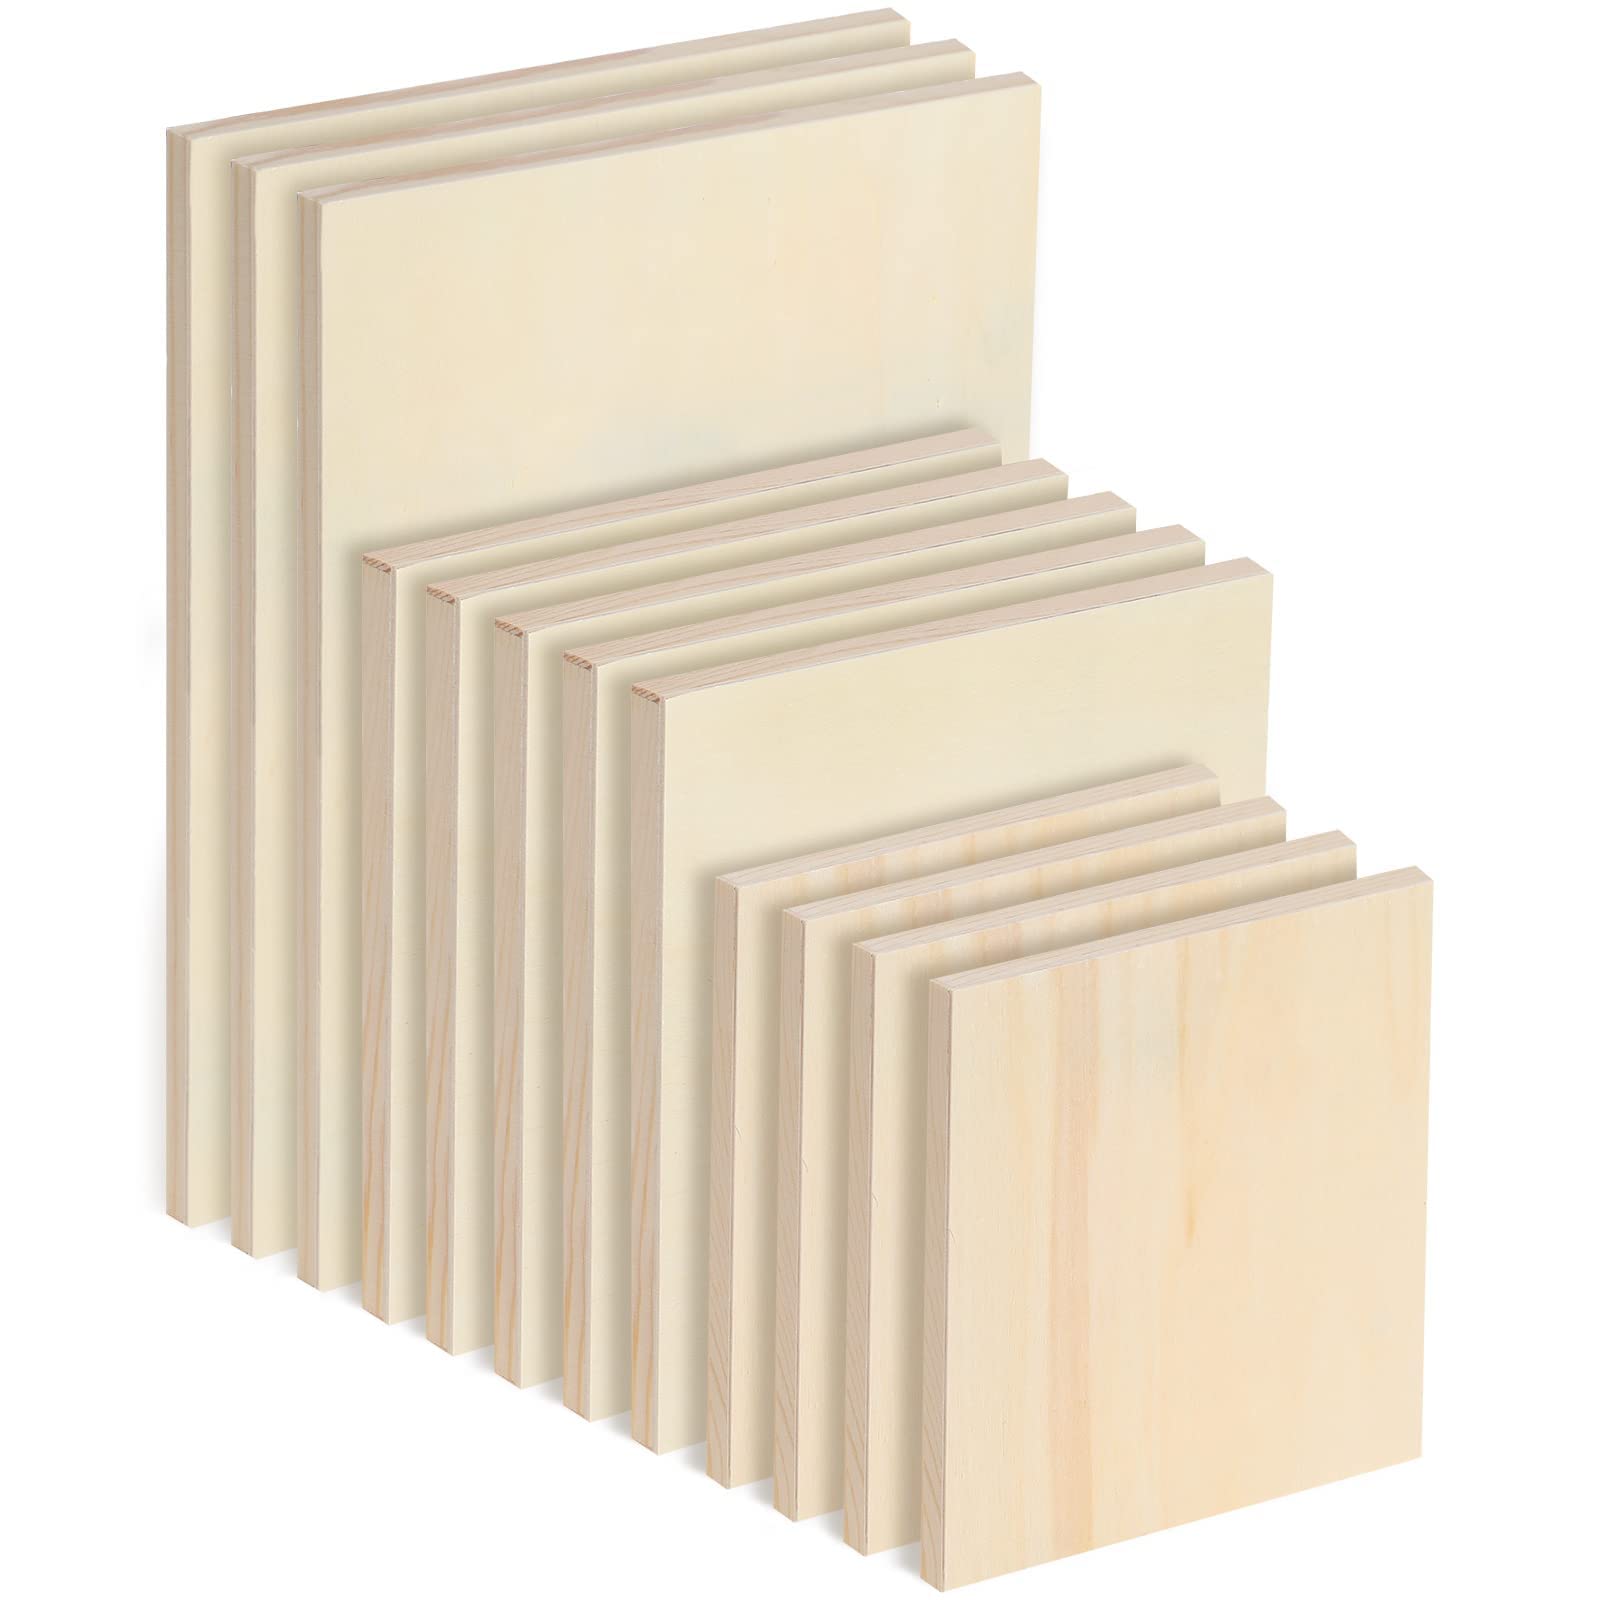 Geetery 3 Pcs Wood Paint Pouring Panel Boards Gallery 1-1/2 Inches